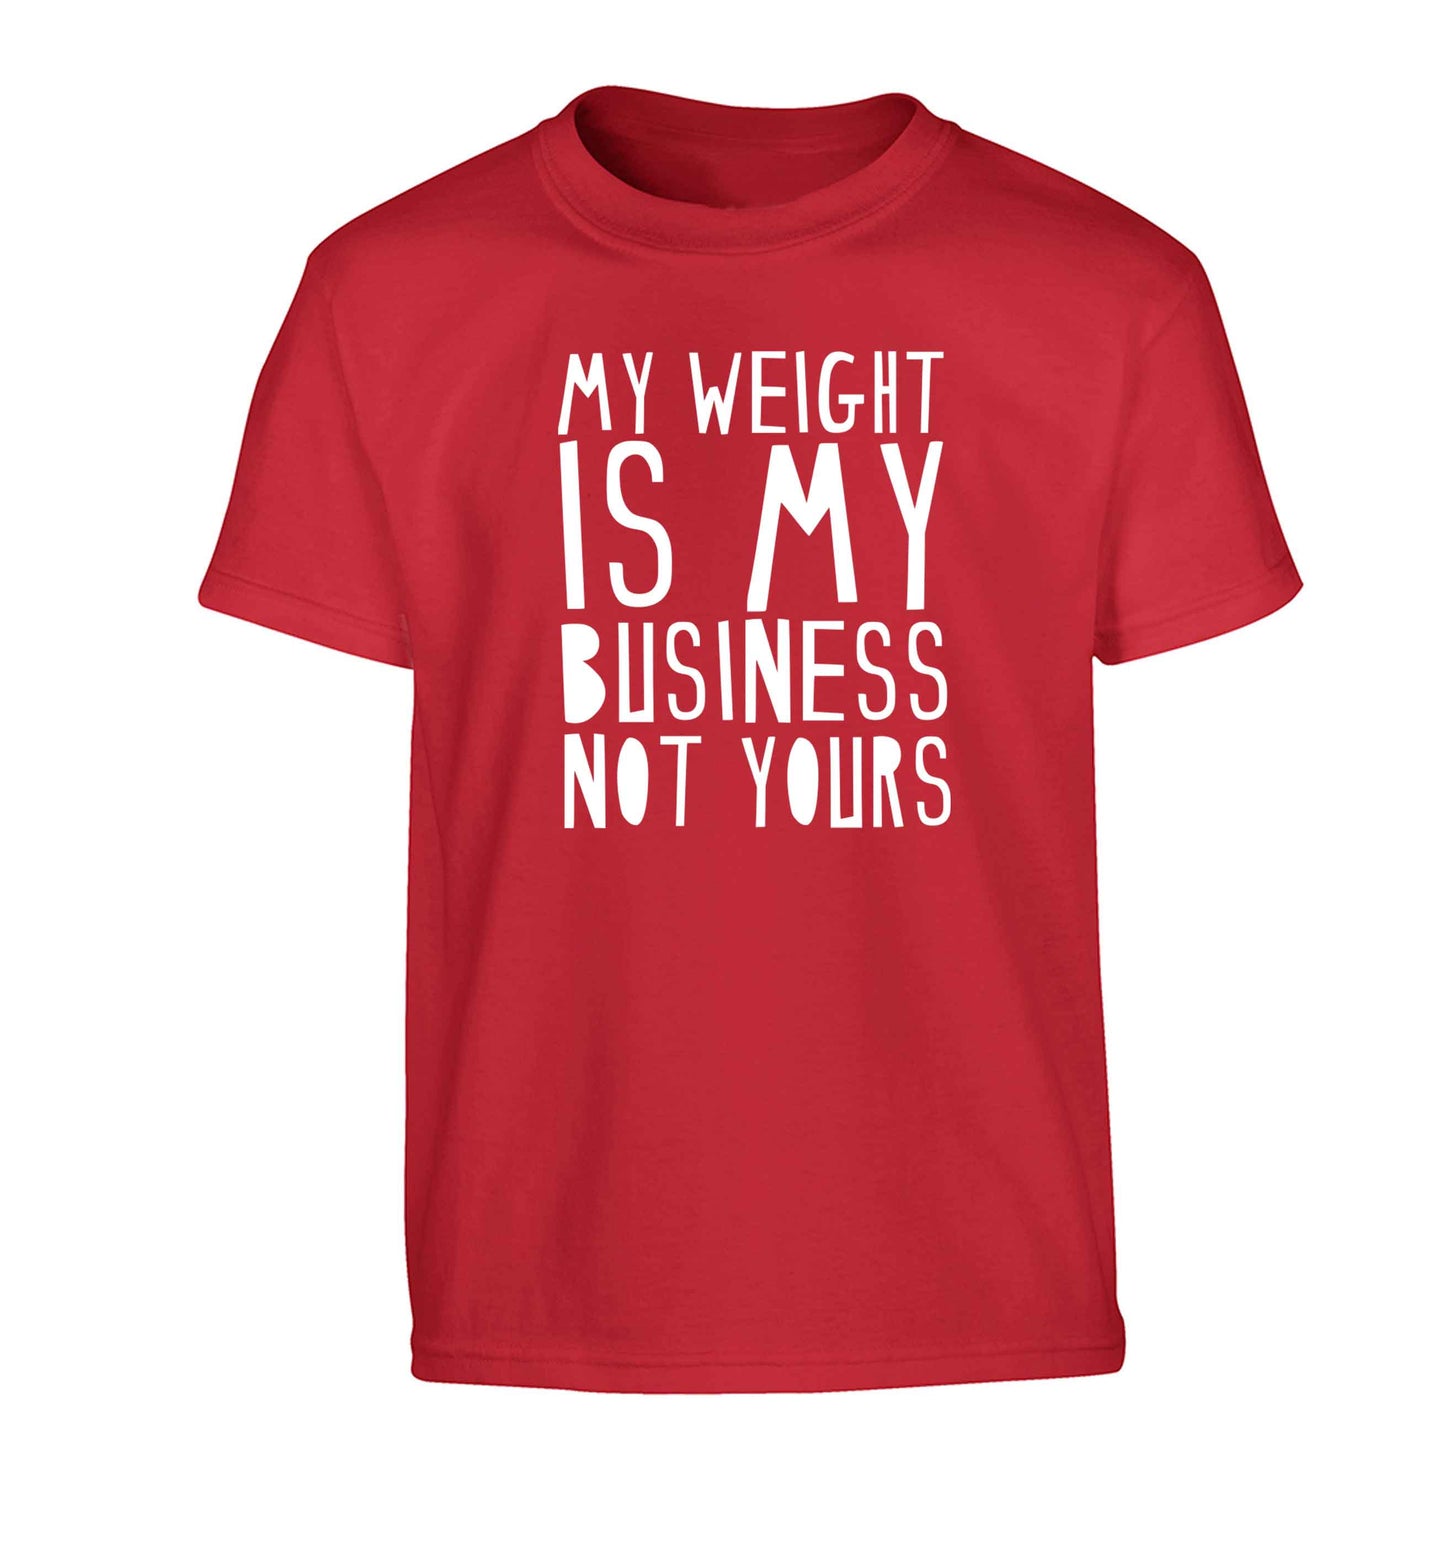 My weight is my business not yours Children's red Tshirt 12-13 Years